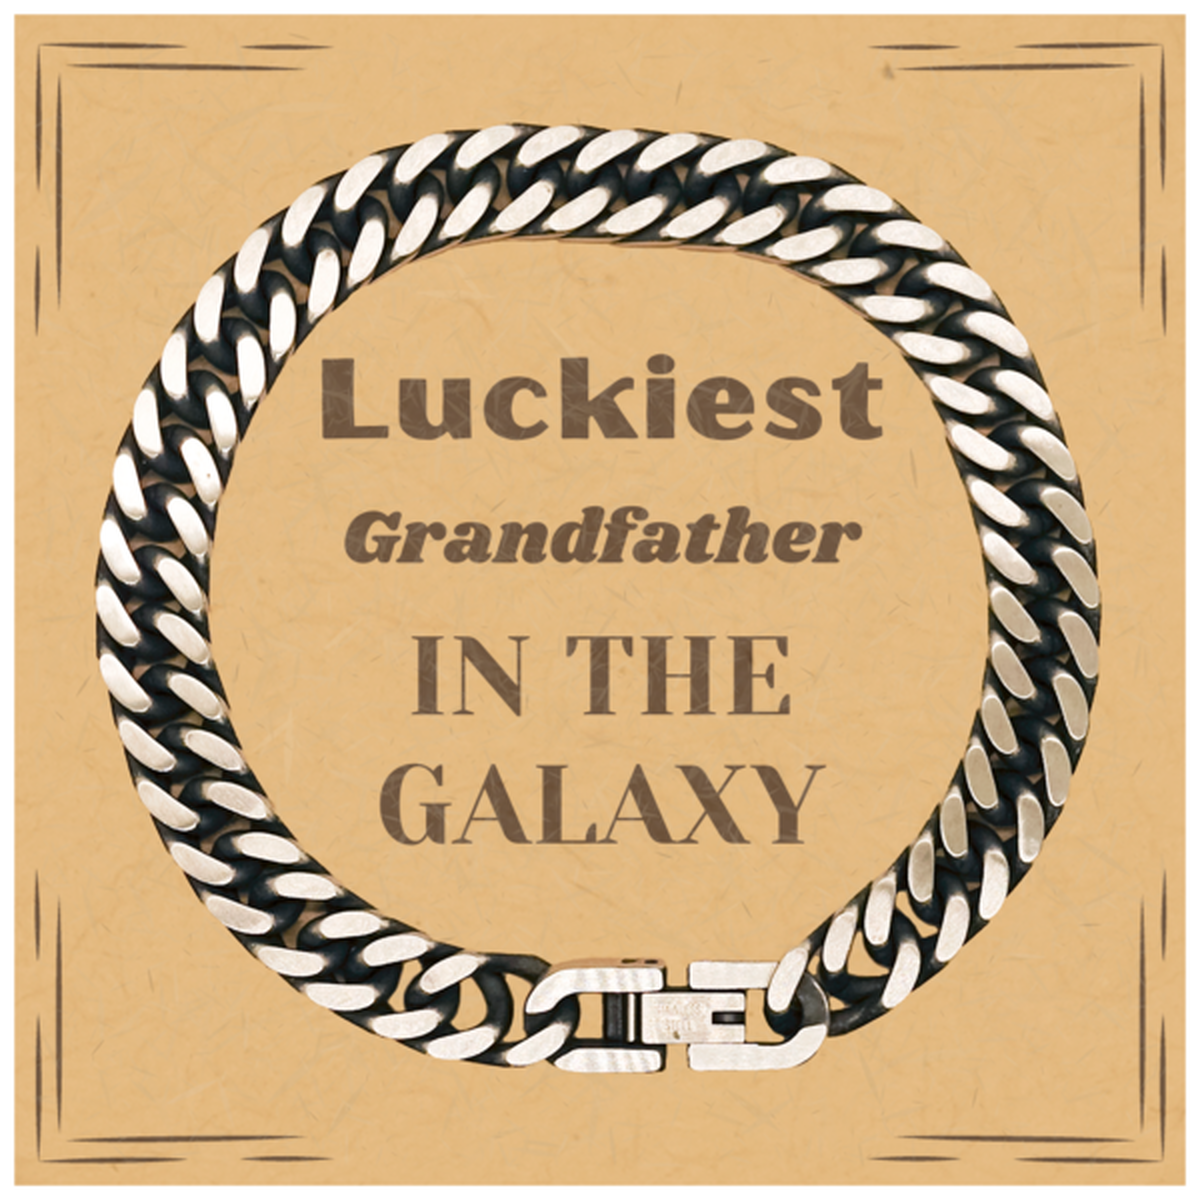 Luckiest Grandfather in the Galaxy, To My Grandfather Message Card Gifts, Christmas Grandfather Cuban Link Chain Bracelet Gifts, X-mas Birthday Unique Gifts For Grandfather Men Women